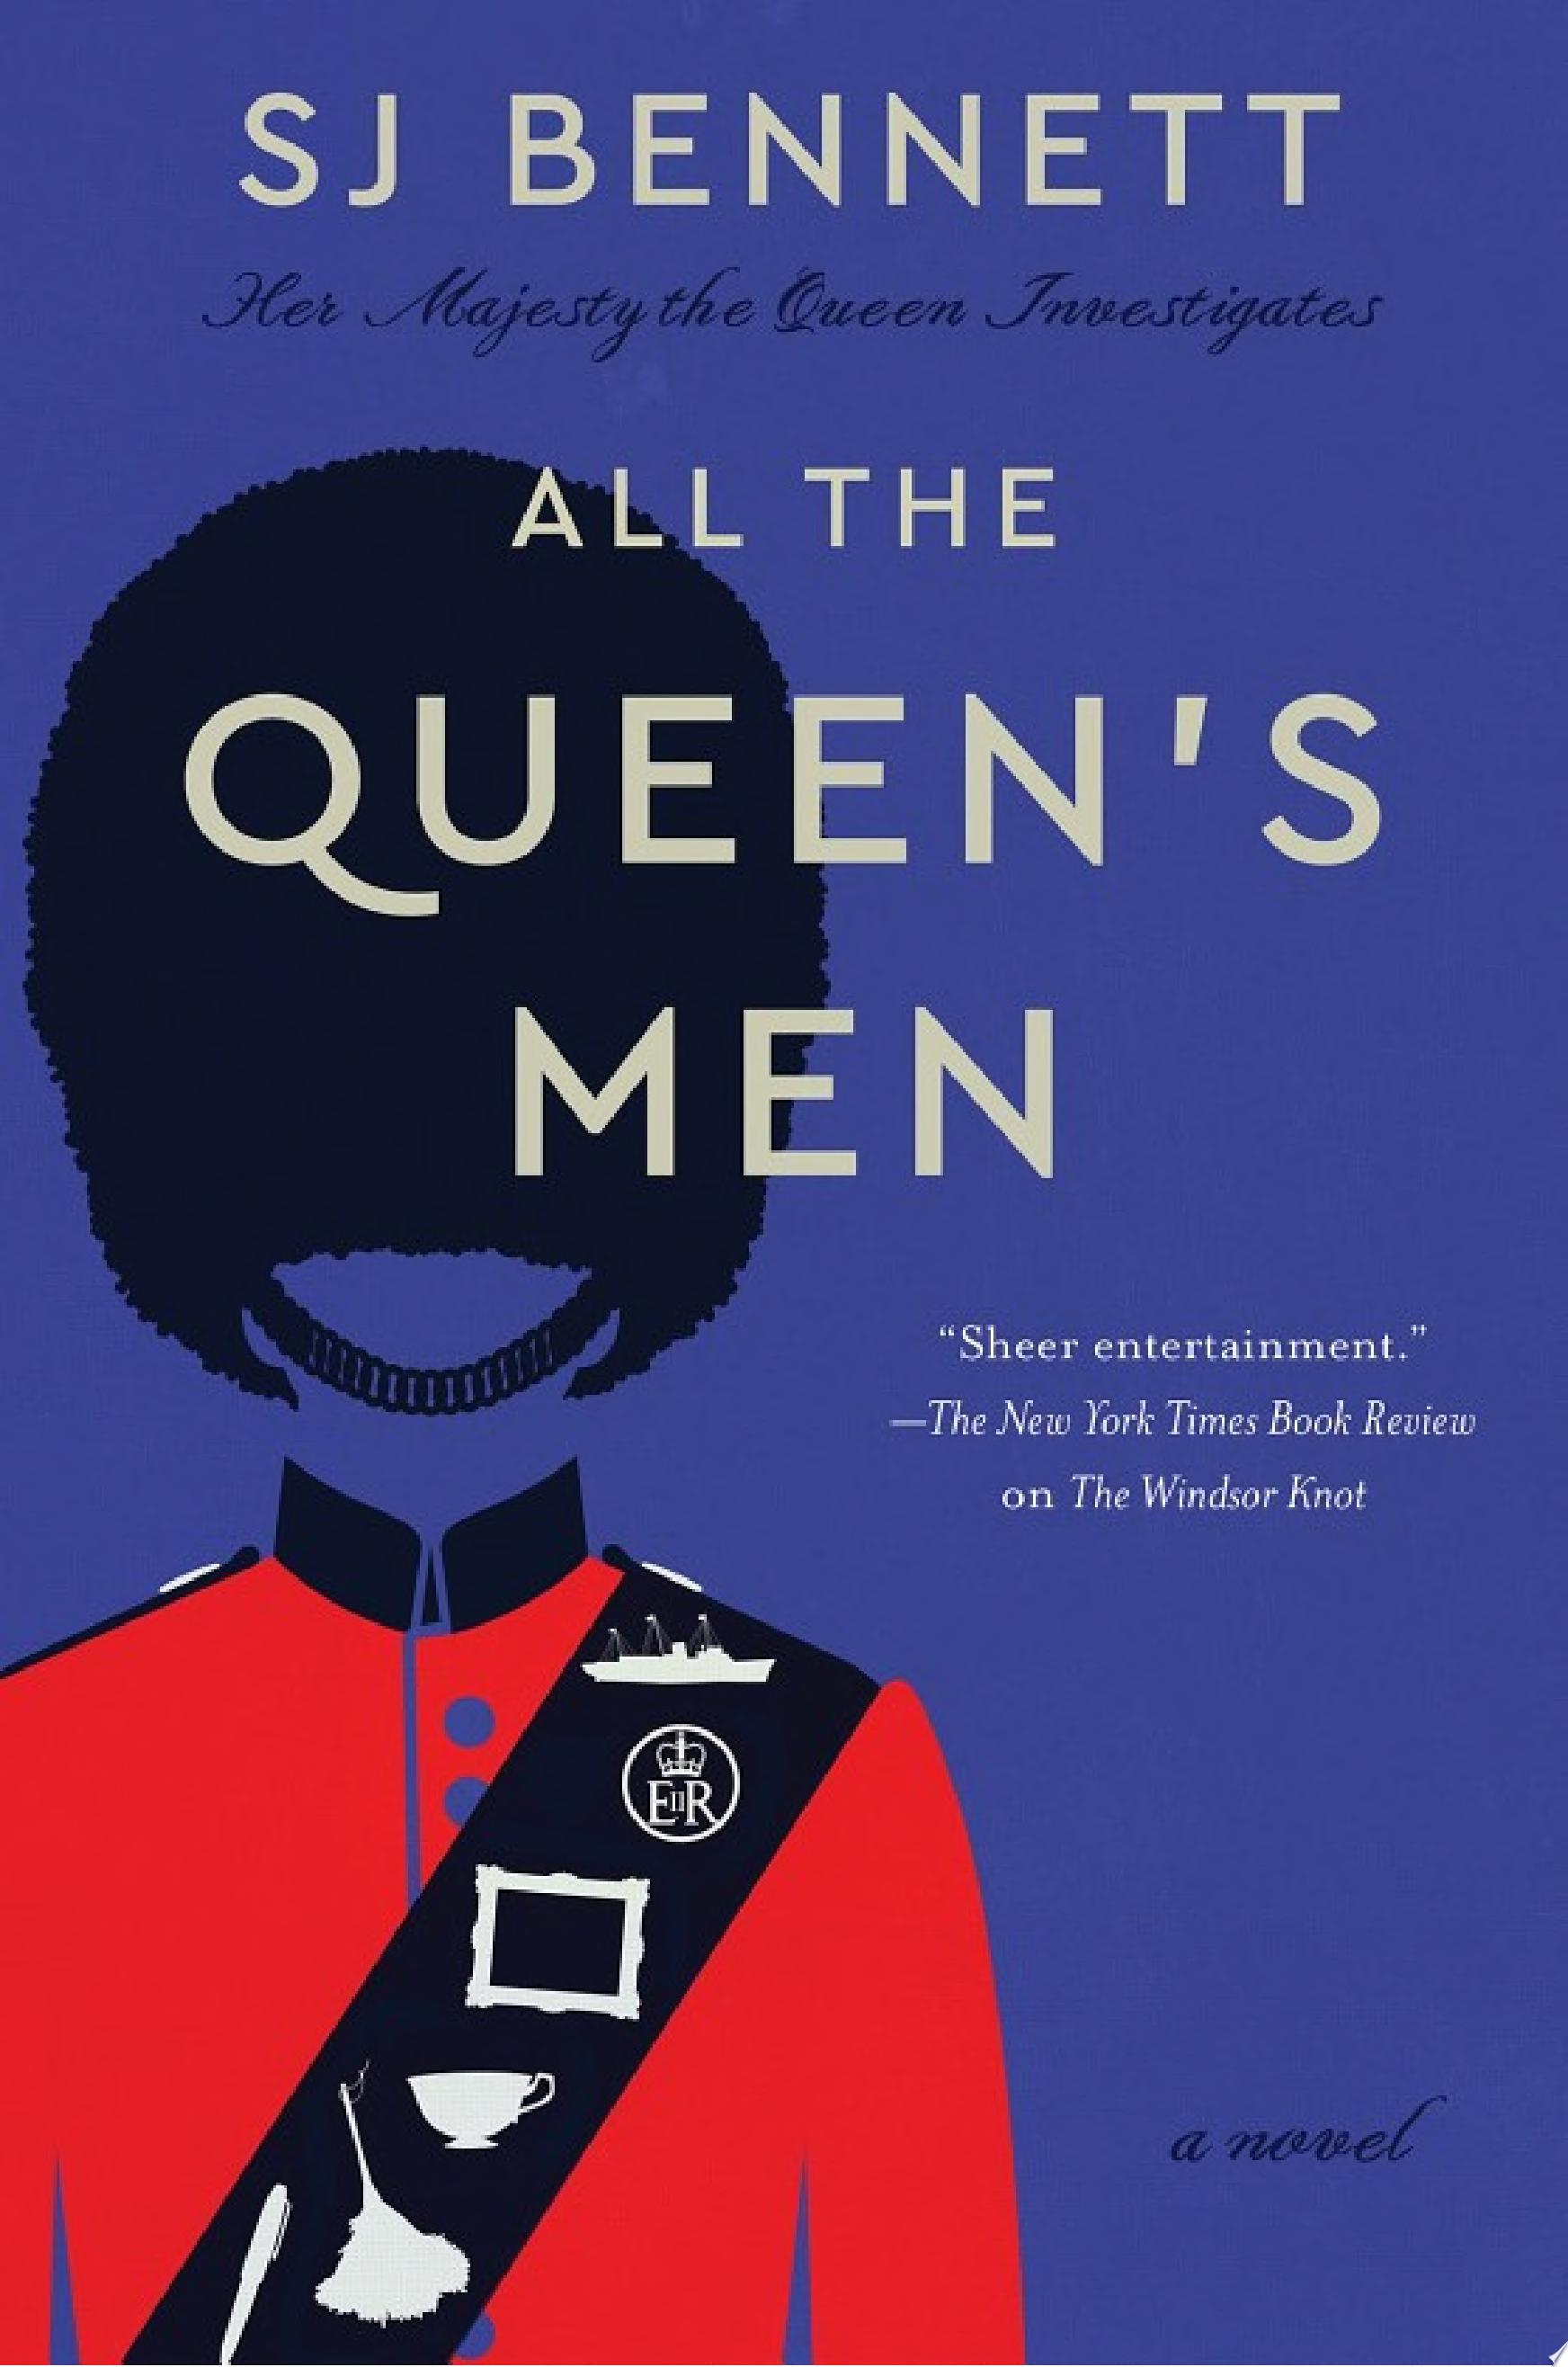 Image for "All the Queen's Men"